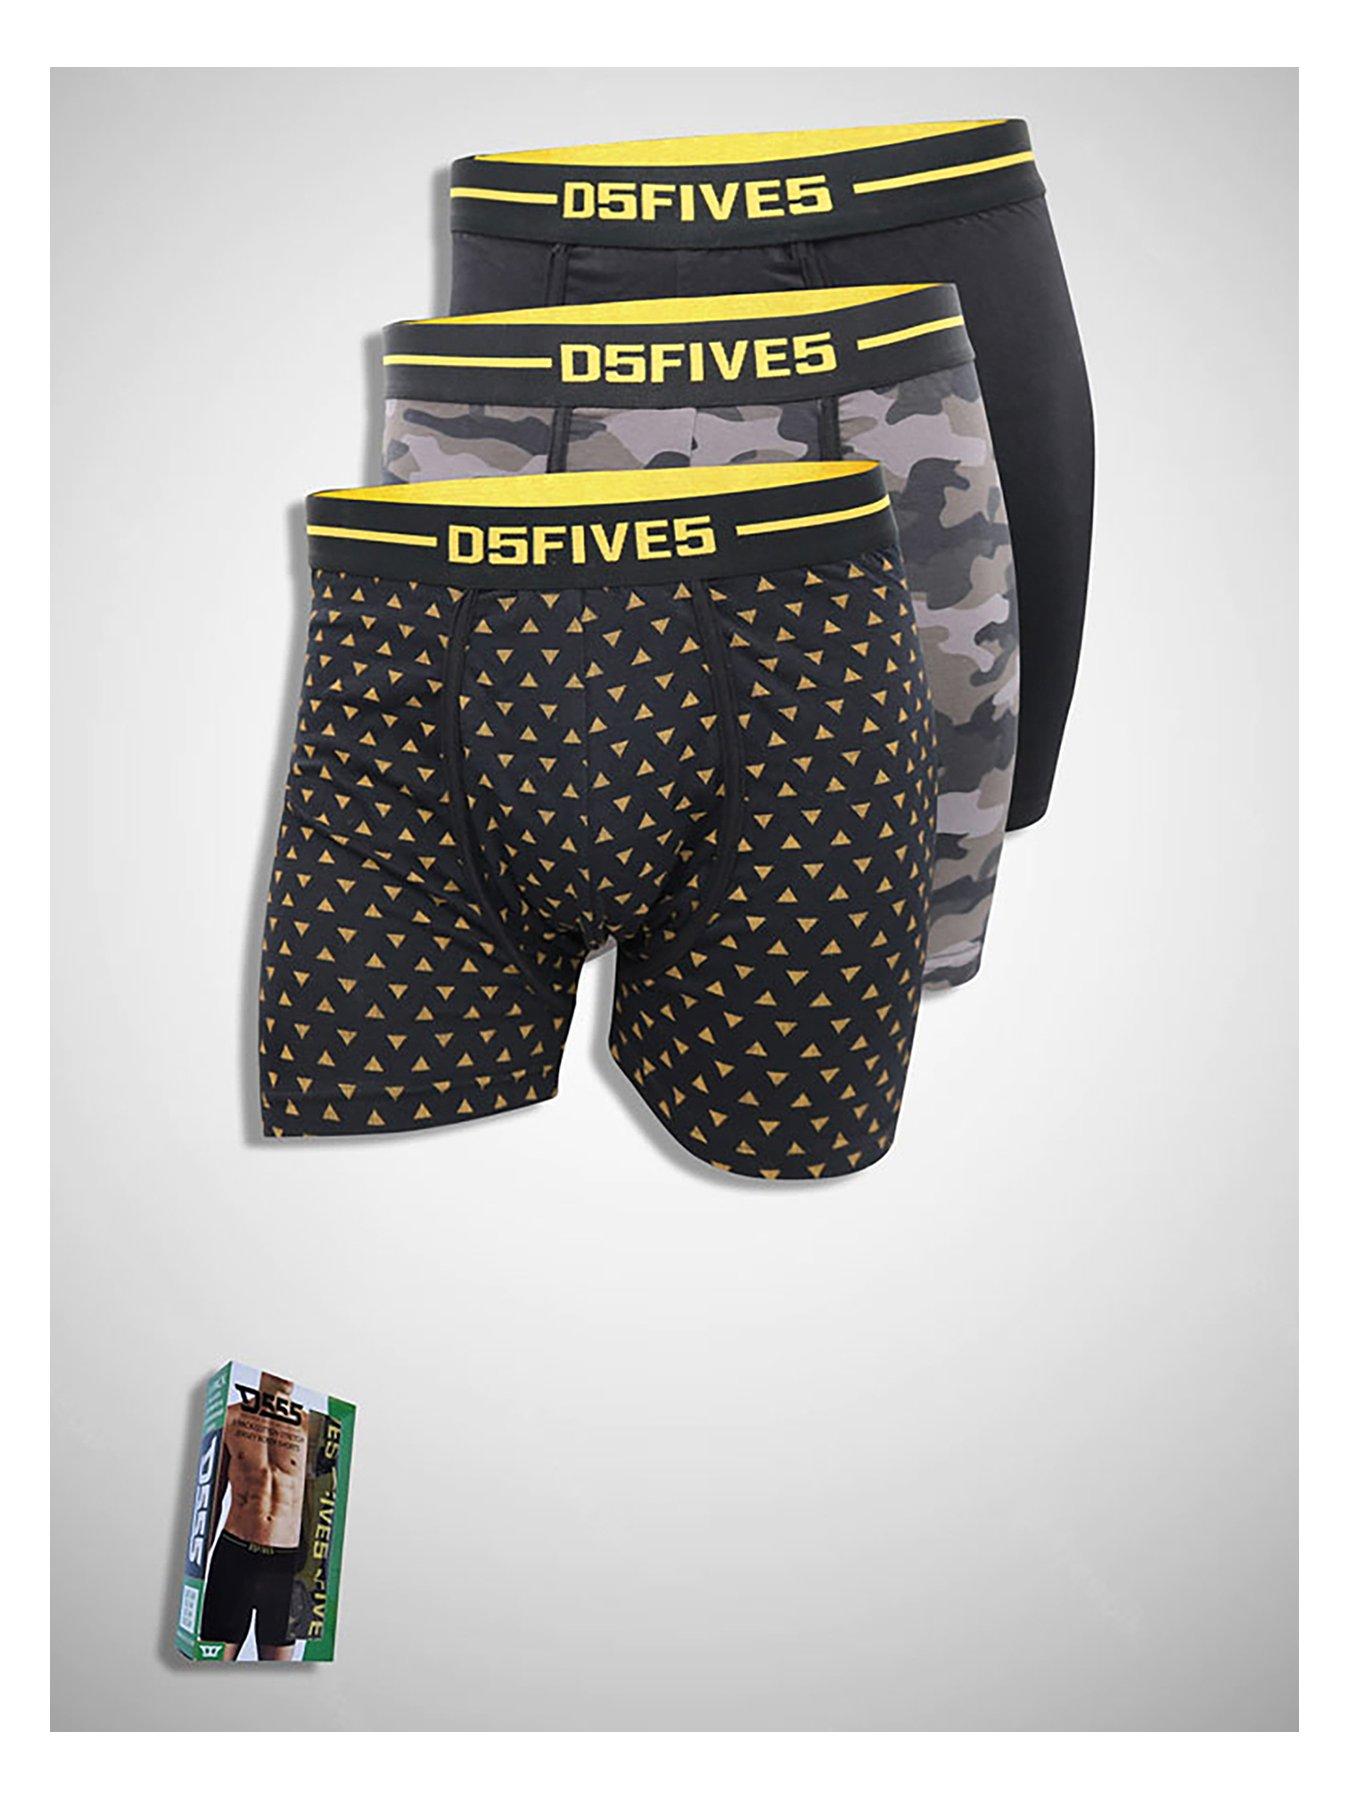 Cotton Printed Mens Woven Boxer Shorts, 1 Color at Rs 145 in